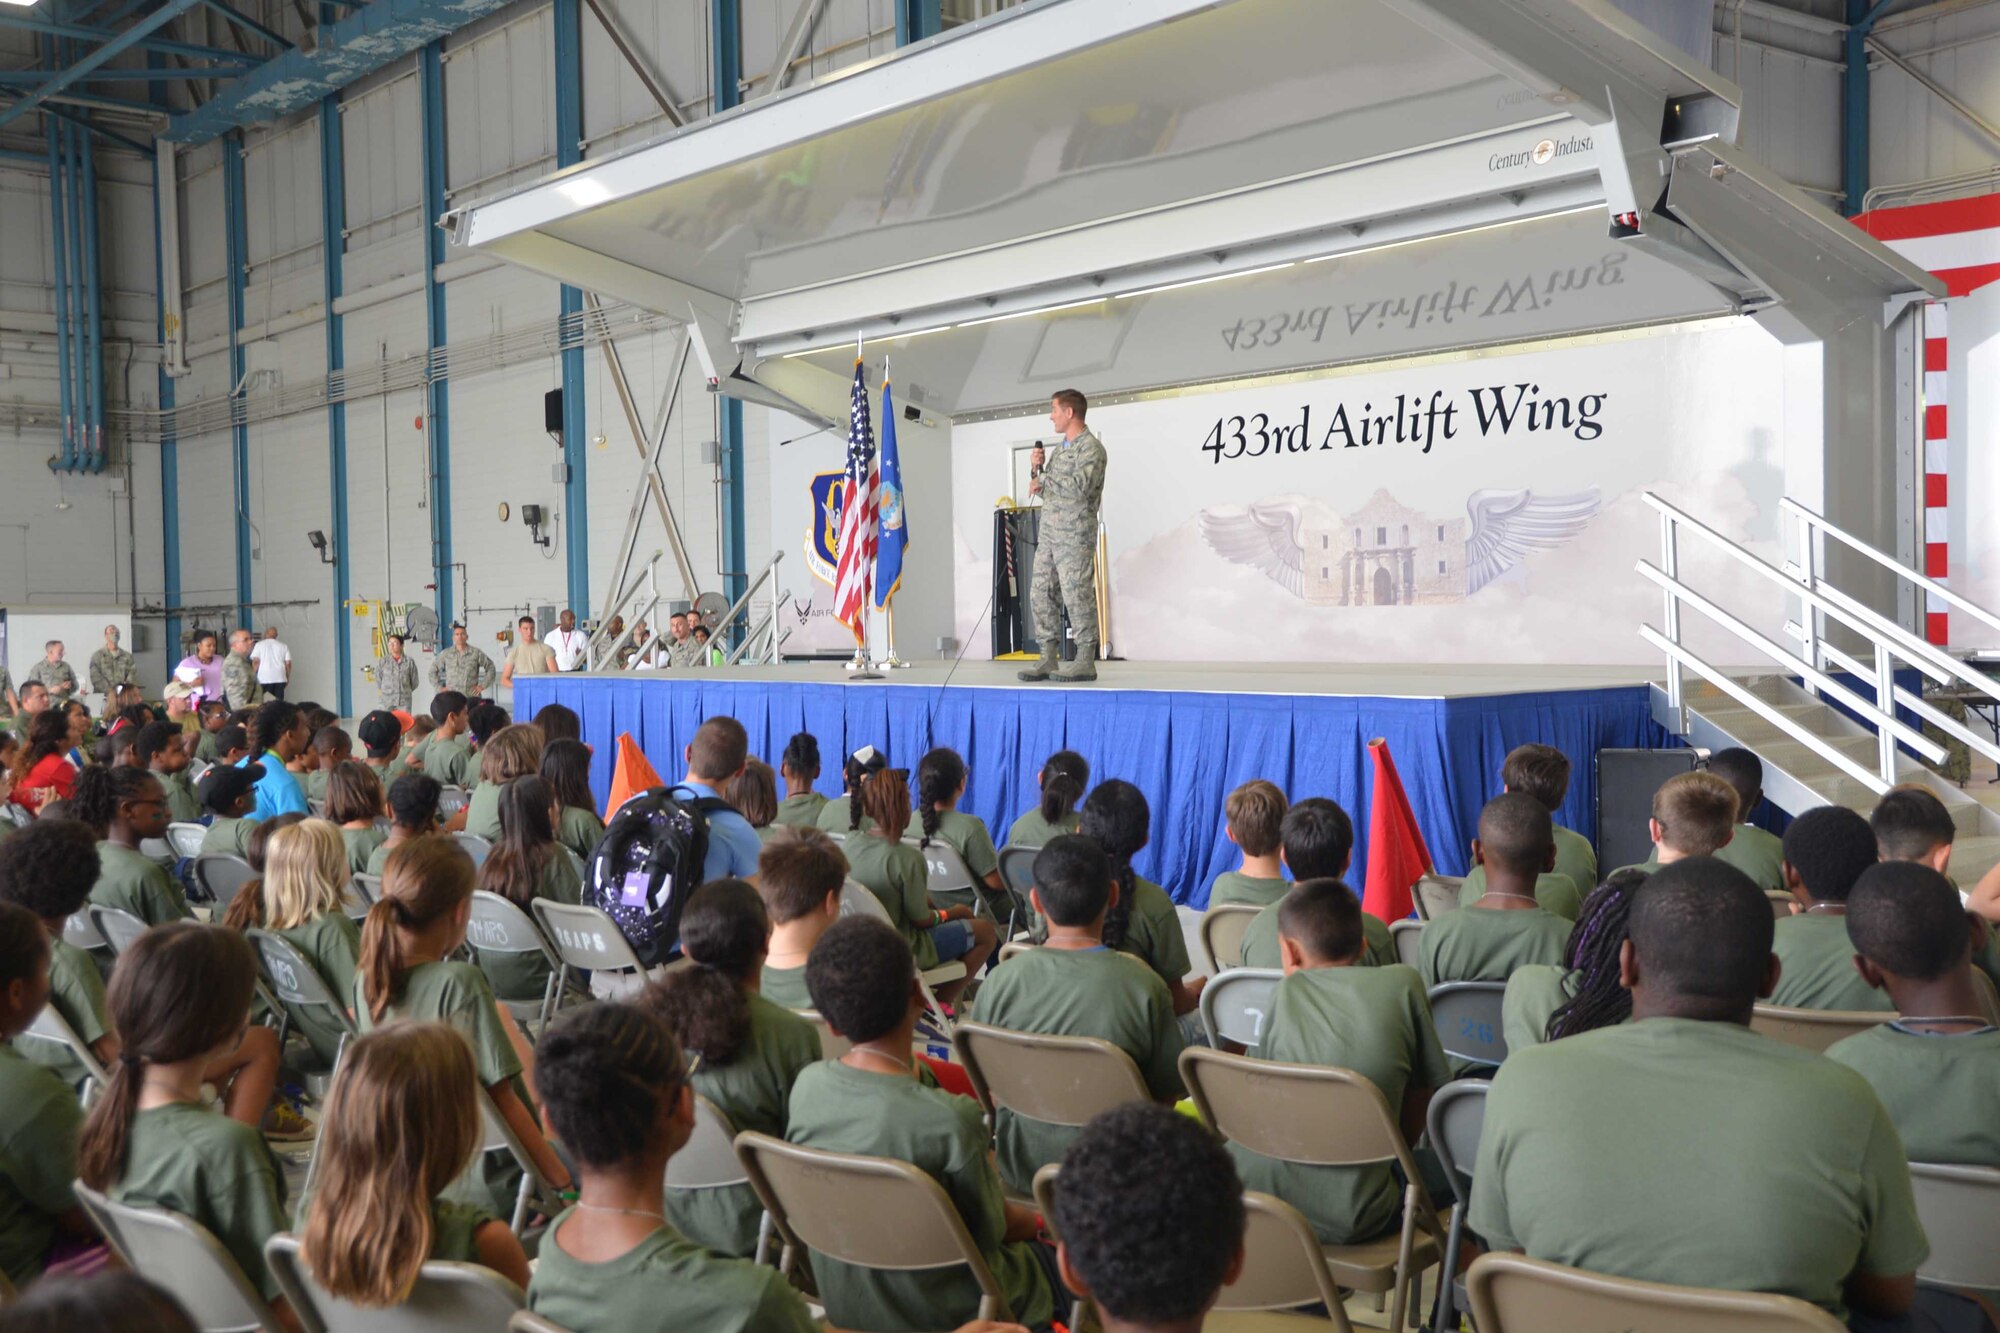 Col. William Whittenberger, 433rd Airlift Wing commander, Joint Base San Antonio-Lackland, Texas welcomes more than 200 children to Lackland’s Operation Junior Expeditionary Team event, July 31, 2015. The event was hosted by the 802nd Military and Family Readiness Center and held in one of the 433rd Airlift Wing’s aircraft hangers. (U.S. Air Force photo/Minnie Jones)